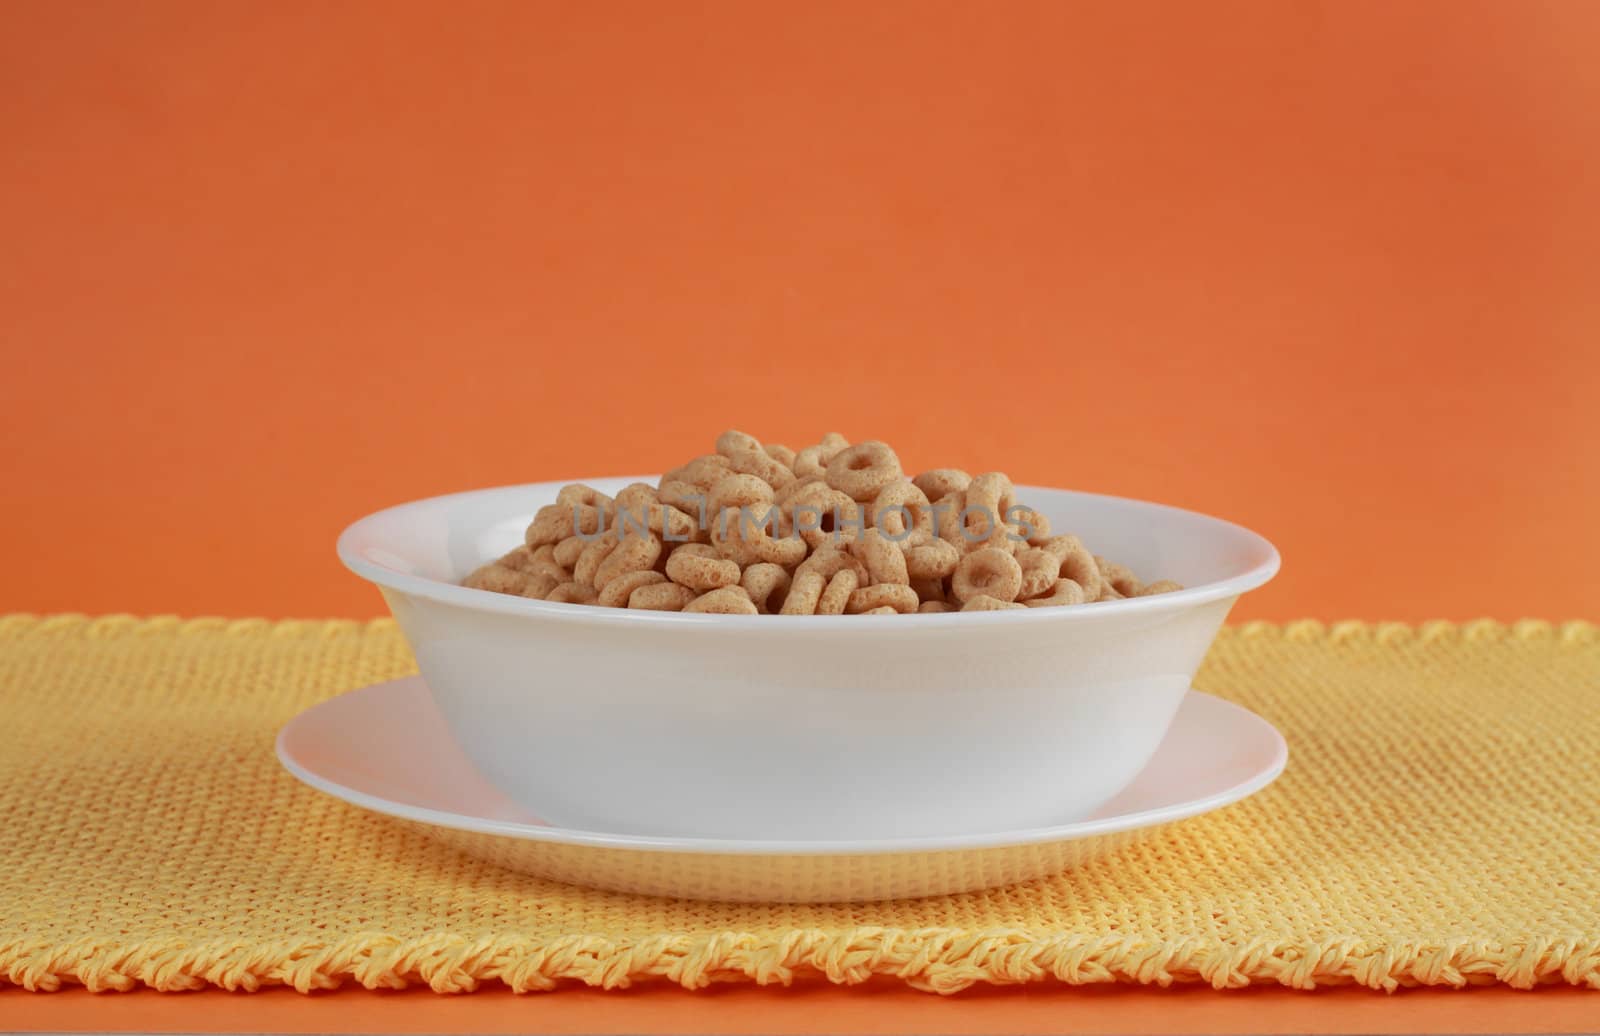 oat, ring, cereals in white bowl, yellow tablecloth, orange background